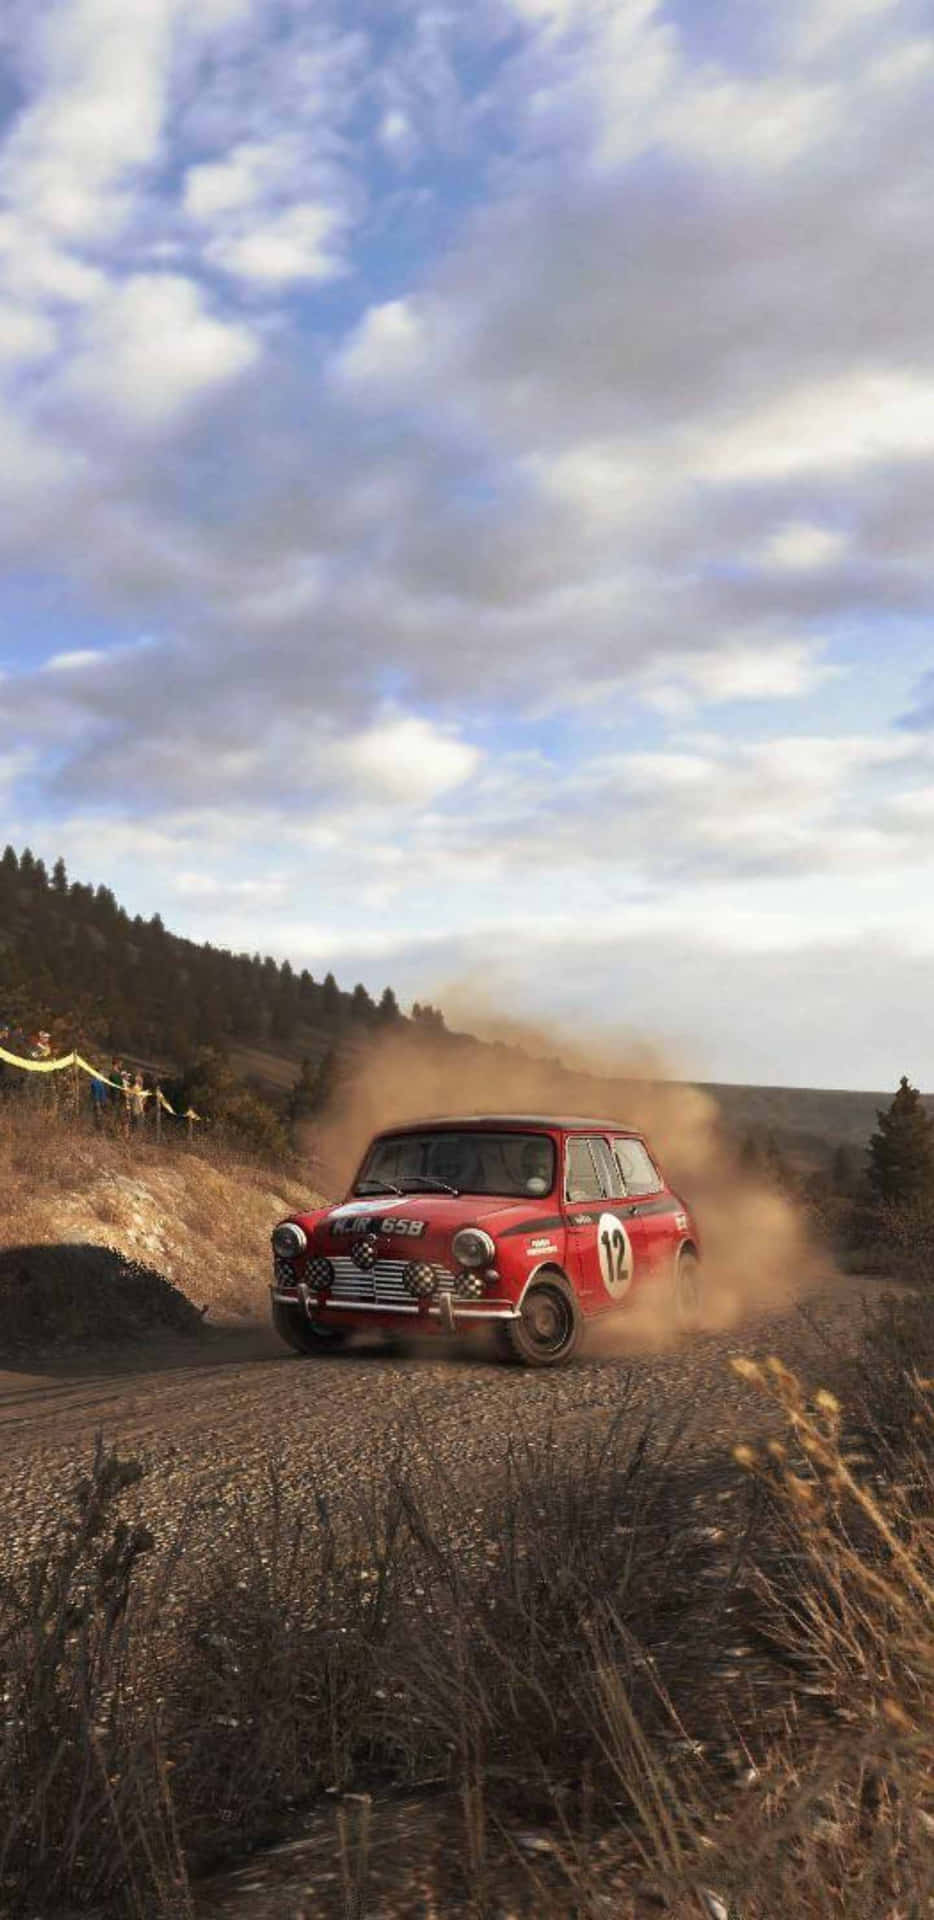 Take on the dirt tracks in Android Dirt Rally